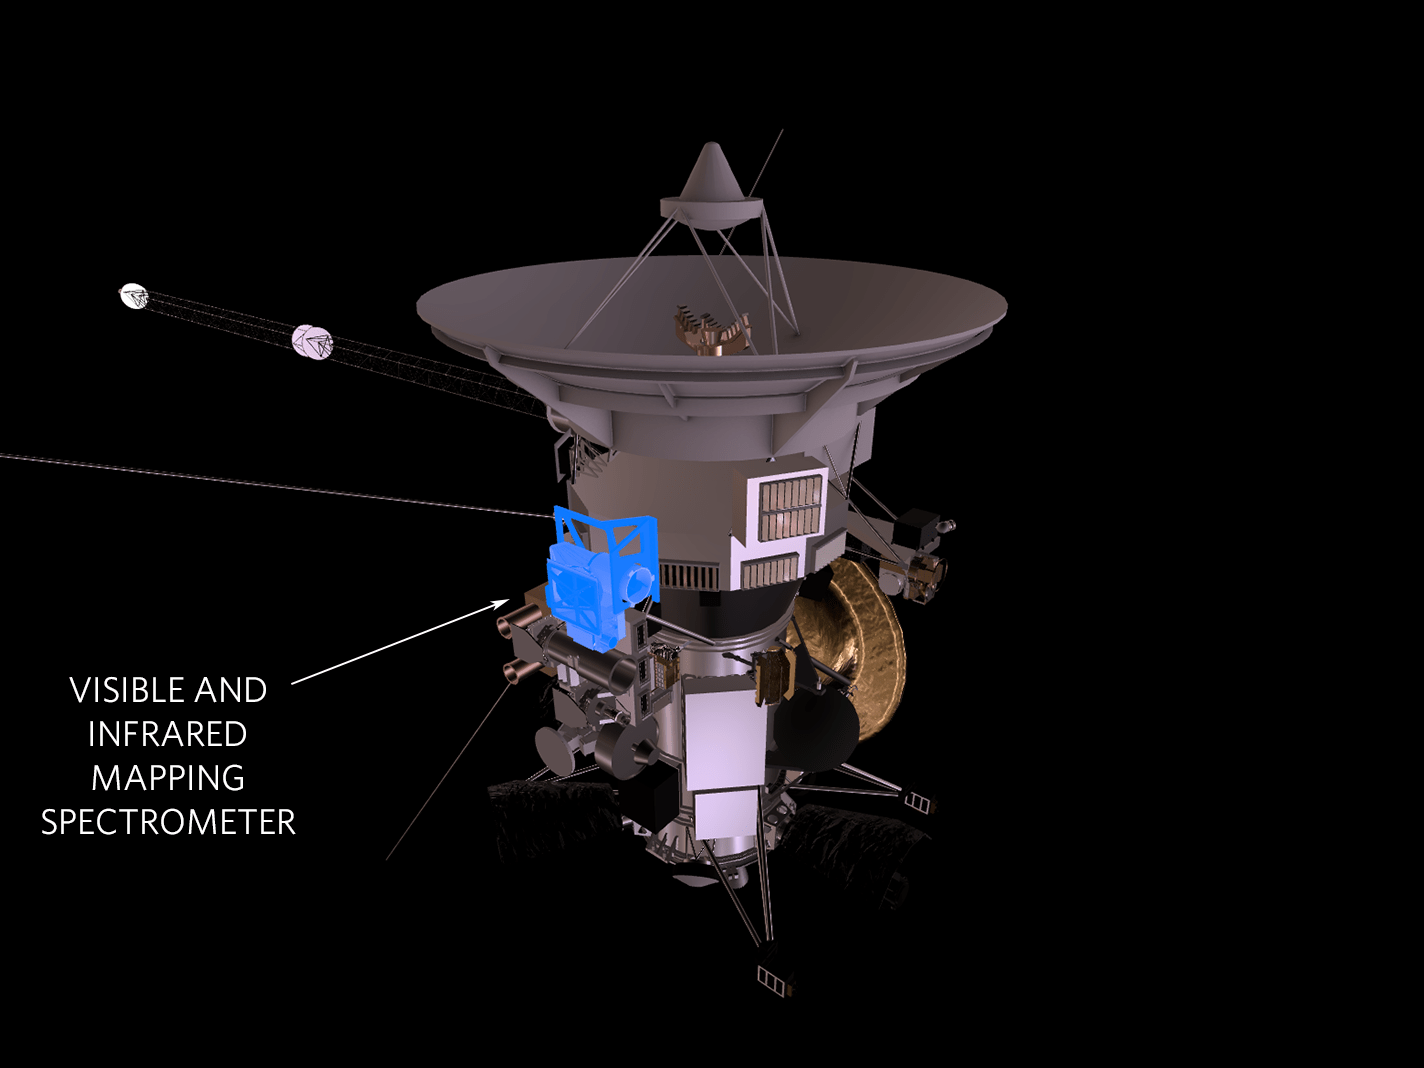 Visible and Infrared Mapping Spectrometer (VIMS)